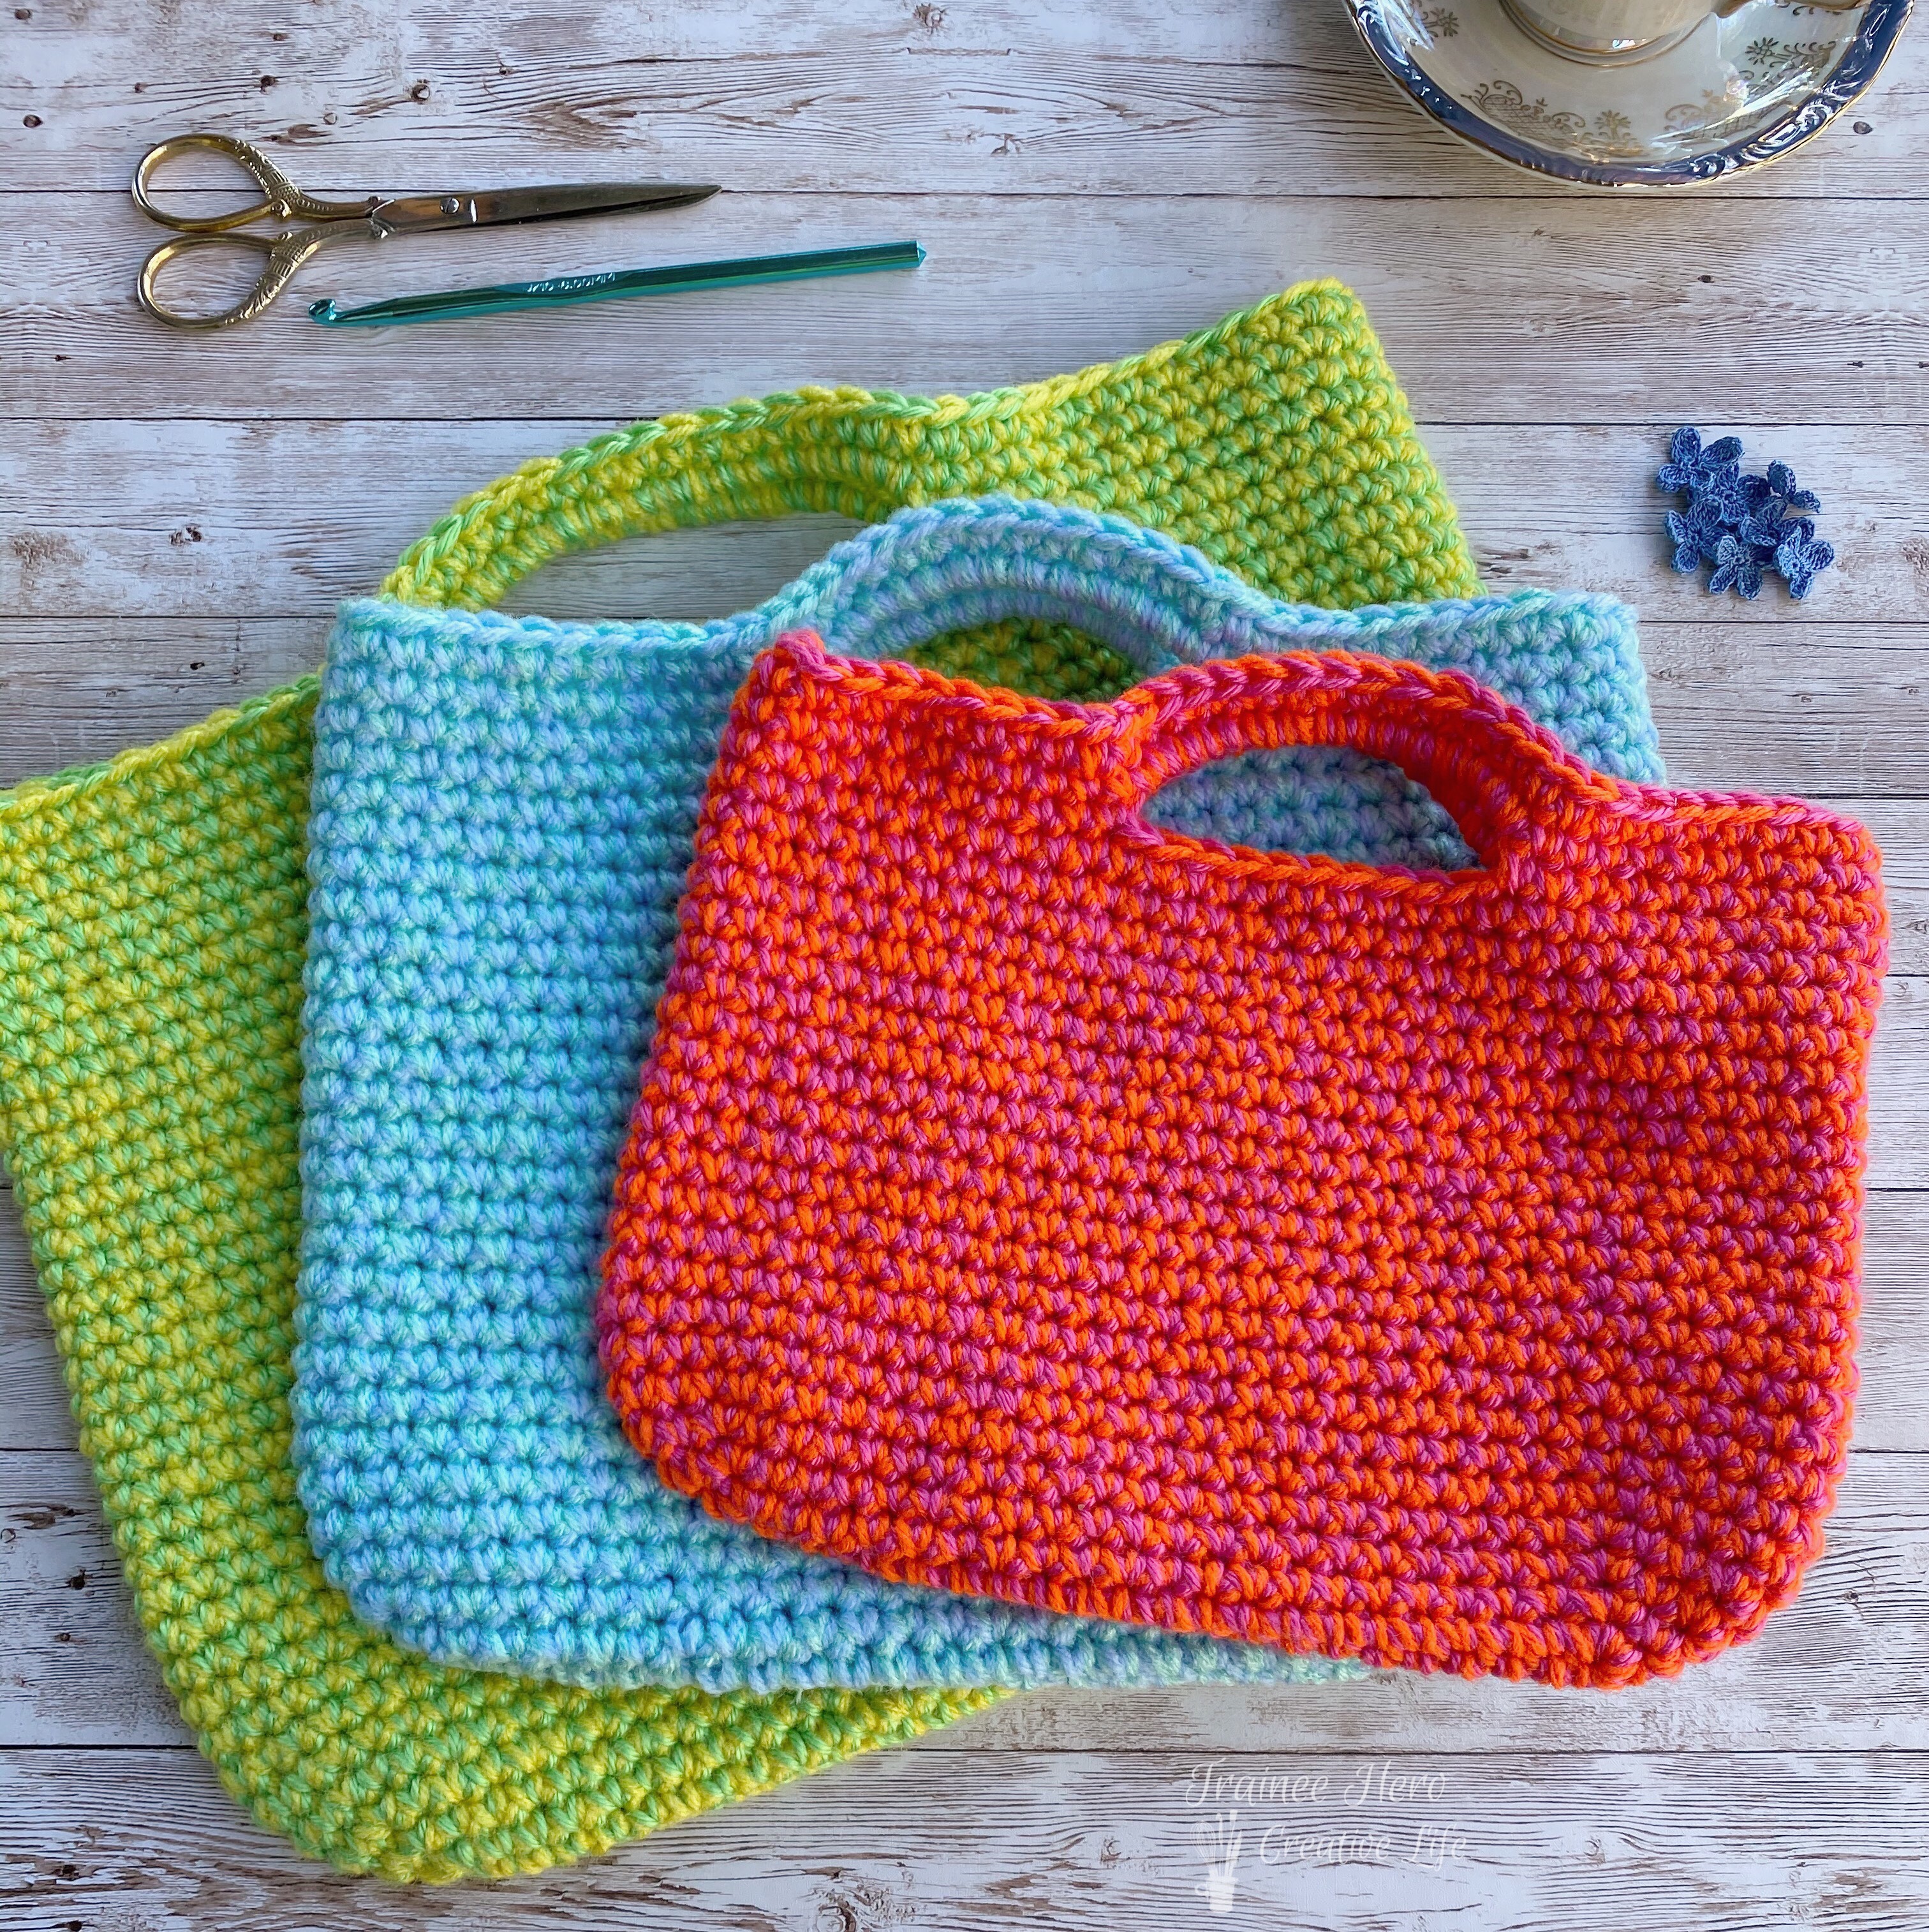 Three crochet project bags in a stack.